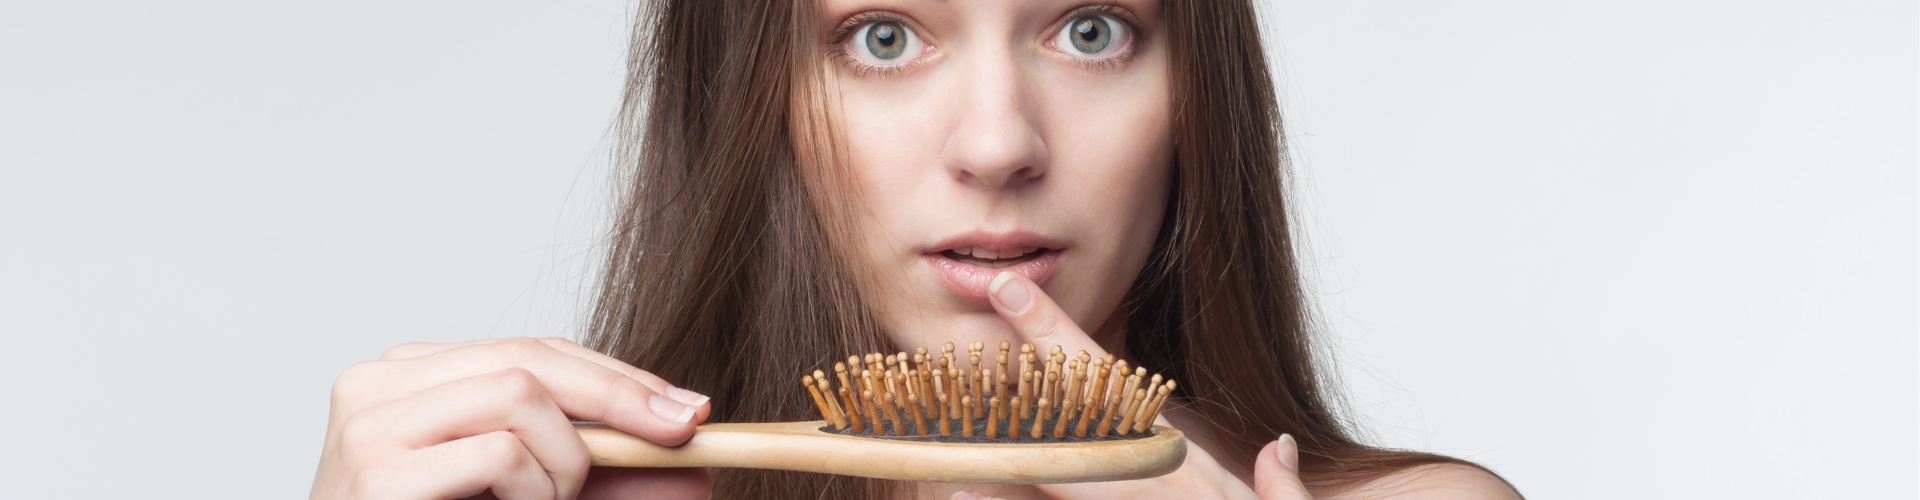 Does Migraine Cause Hair Loss?